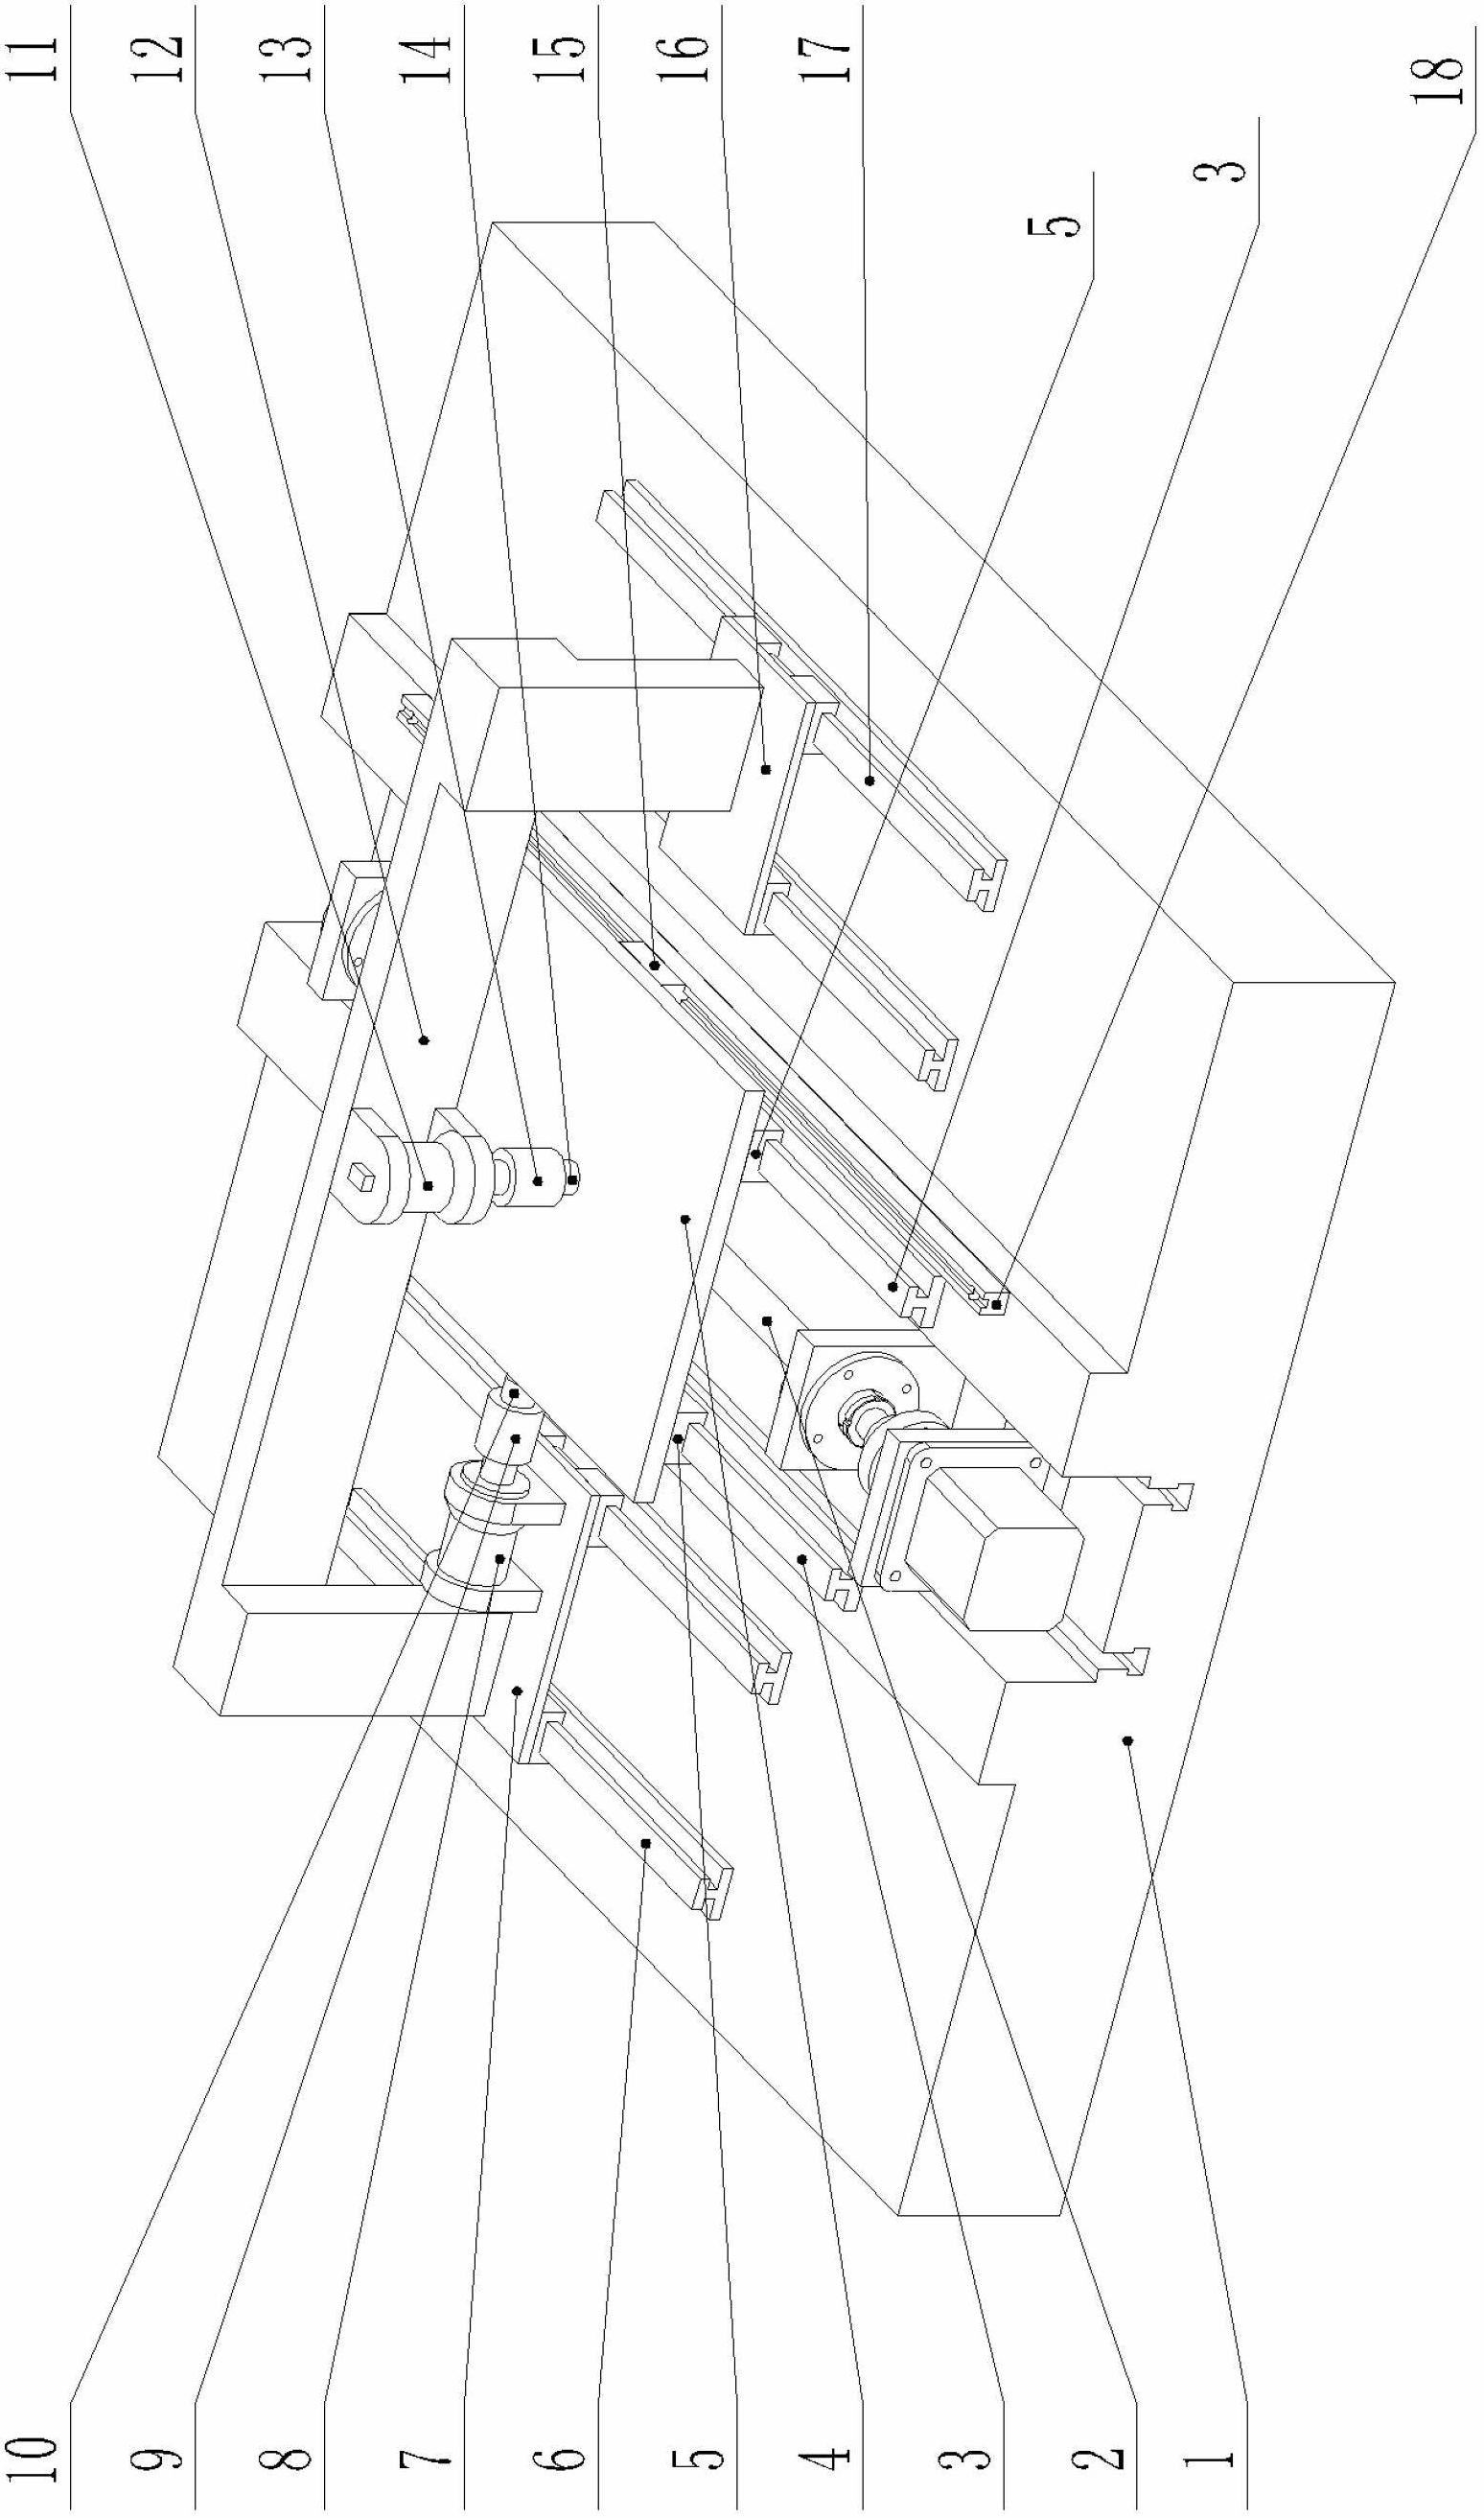 Passive follow-up force-applied linear guiderail pair test bed with controllable load